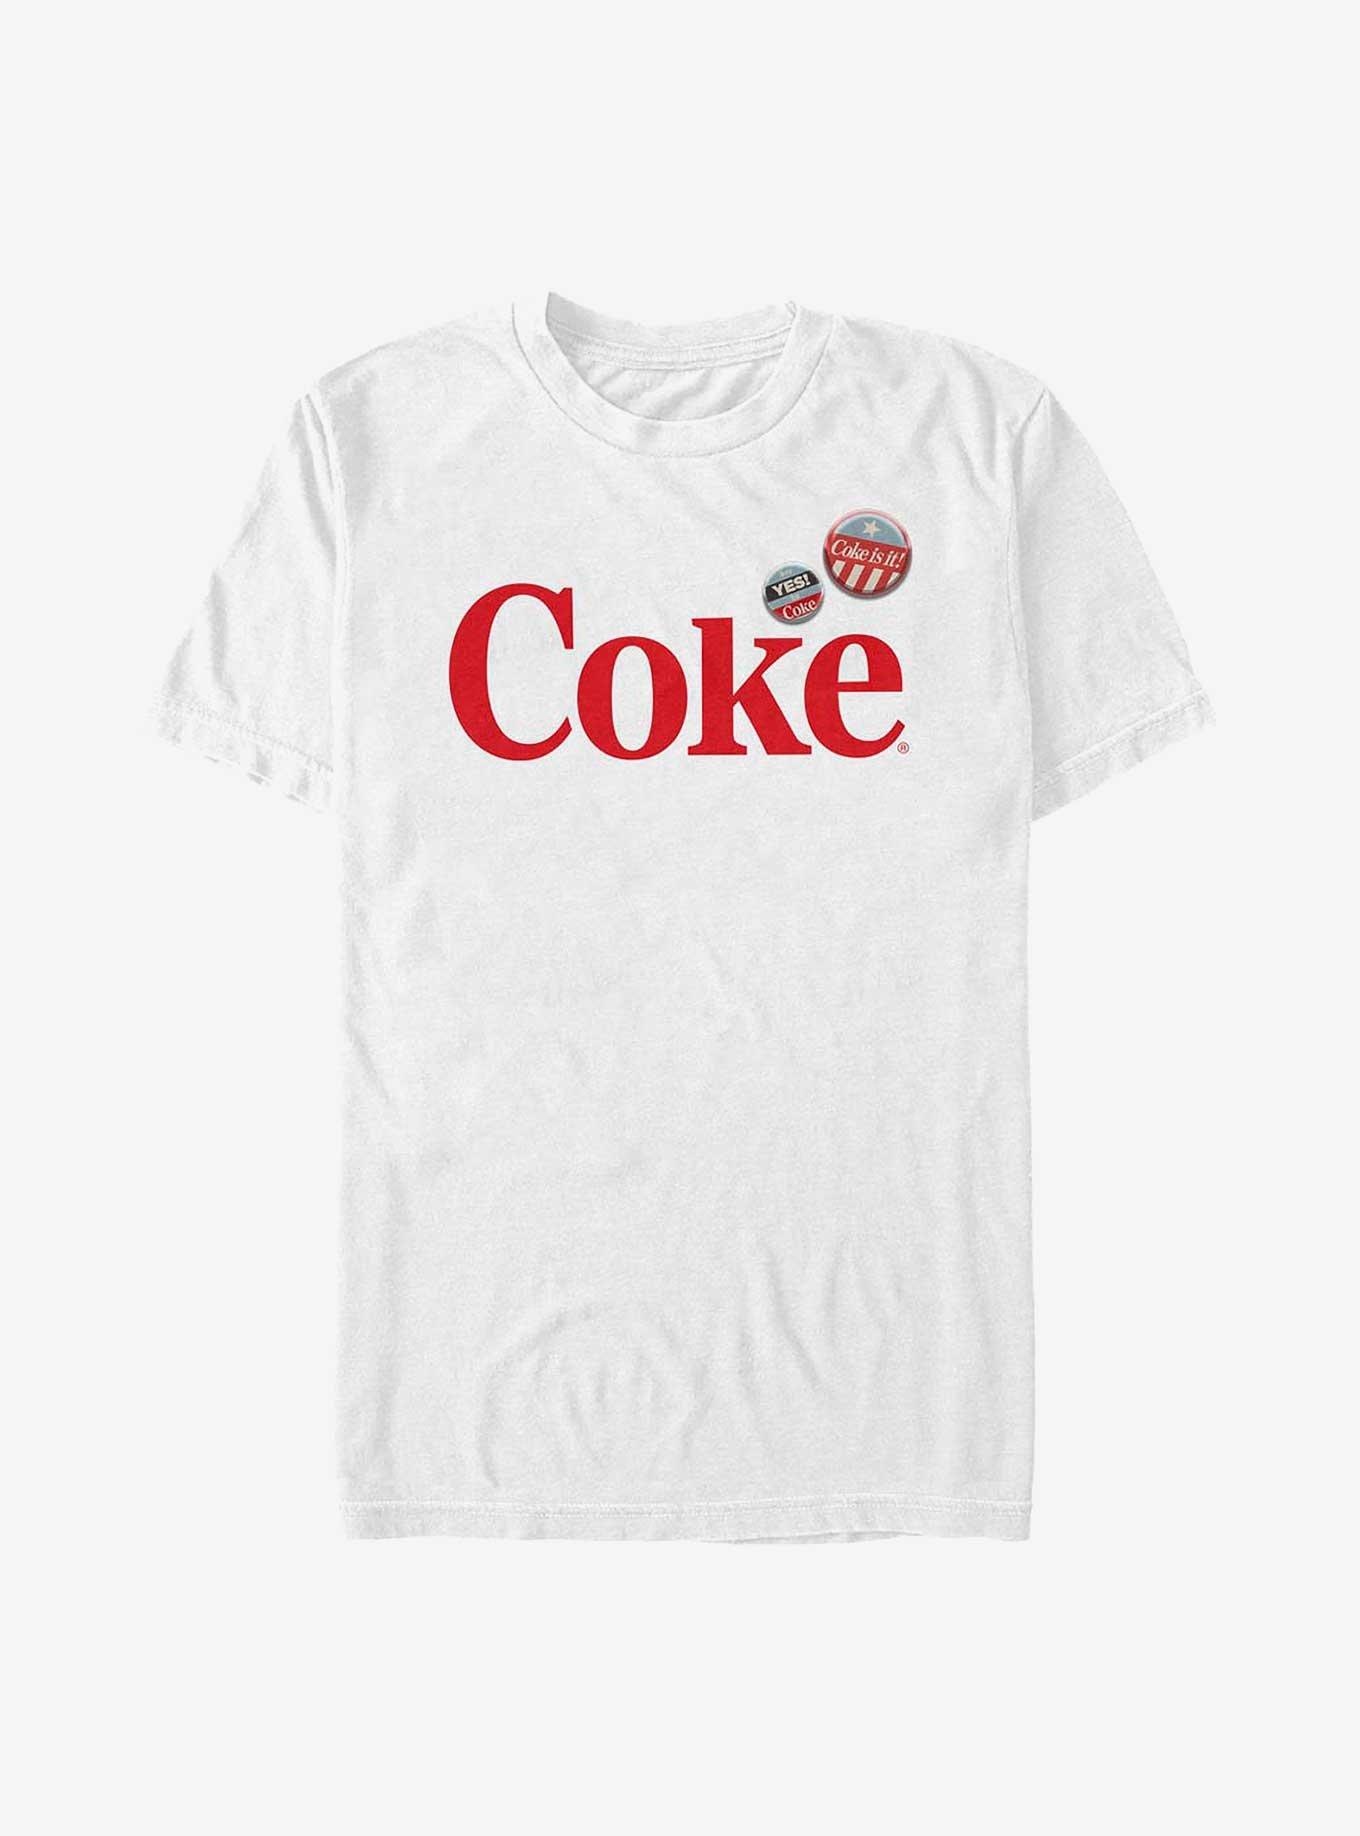 Coca-Cola Coke With Buttons T-Shirt